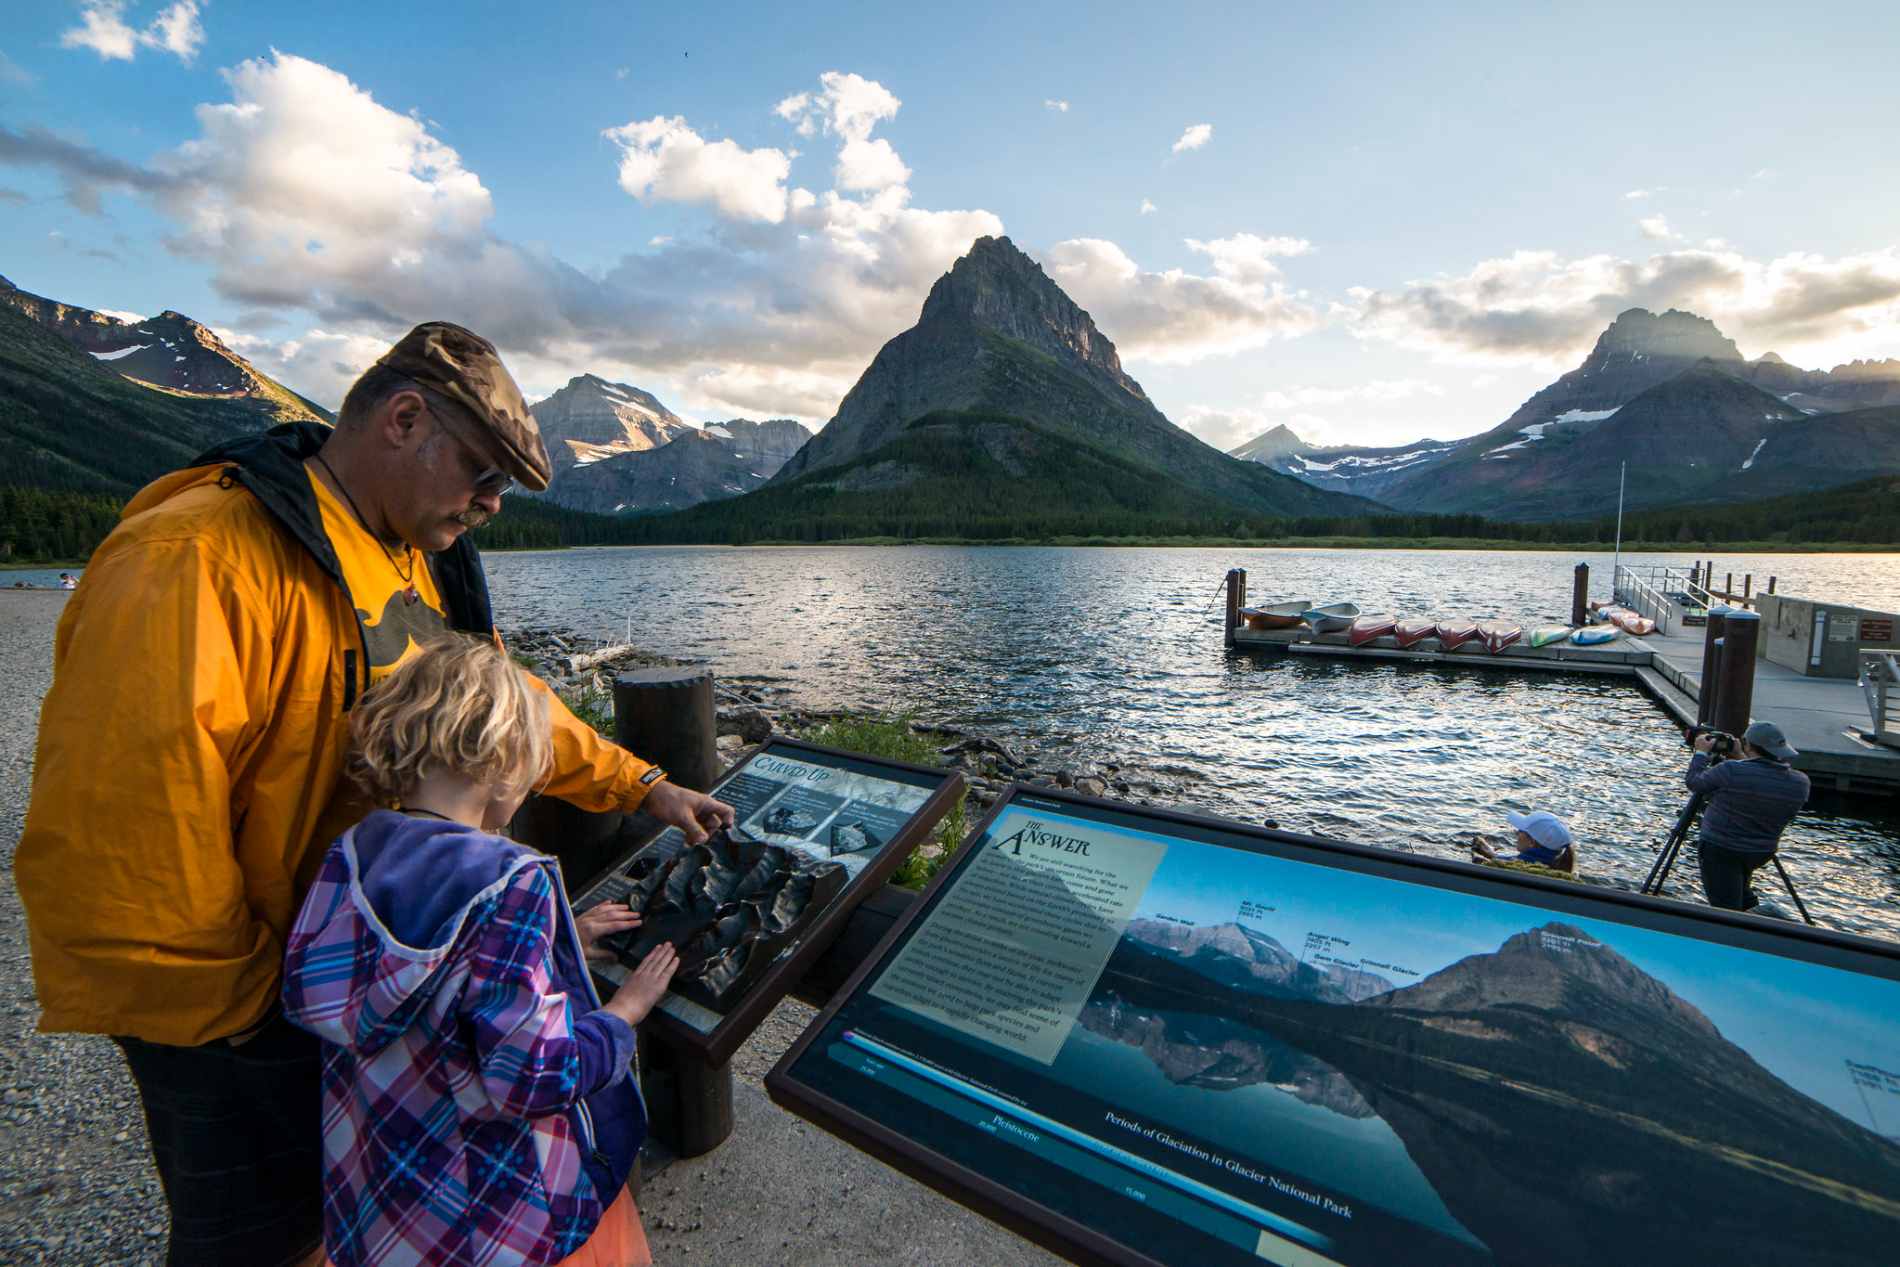 A family reading an informational sign in Glacier National Park